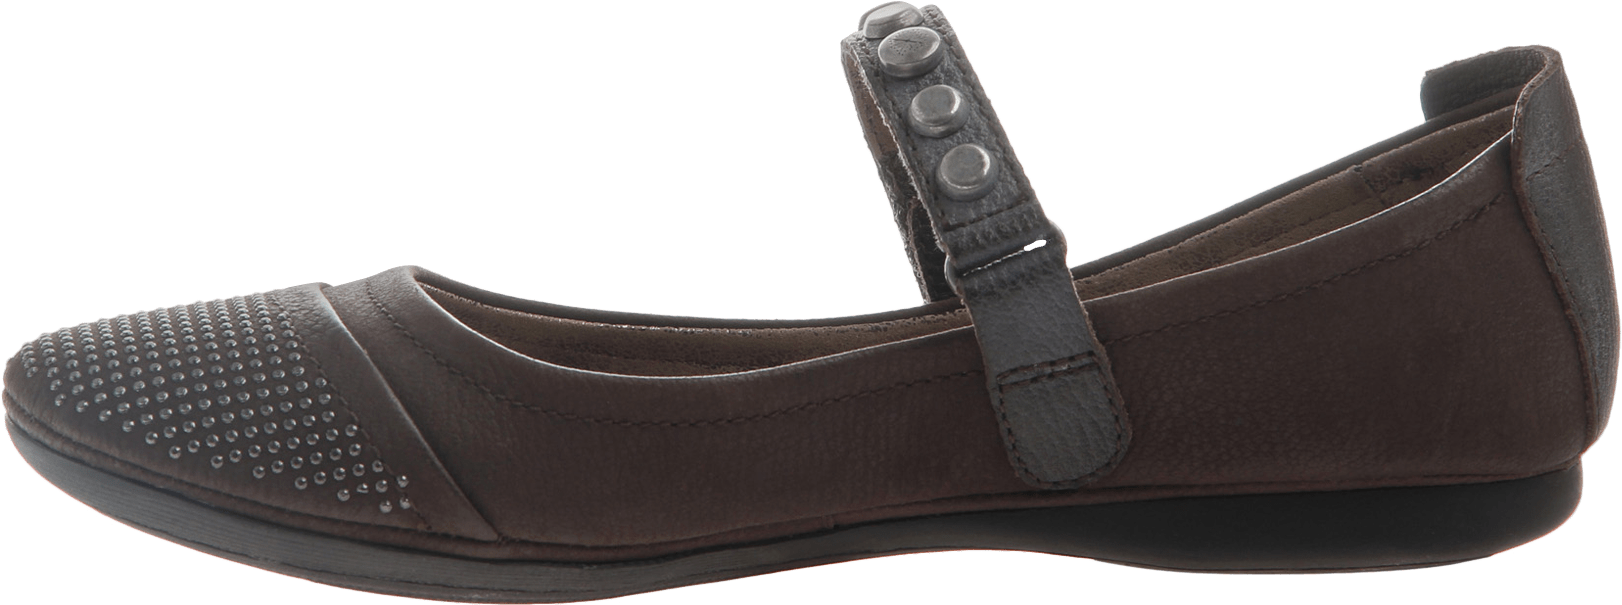 Protestor Women's Flat In Rich Brown Inside View - Slip-on Shoe (1782x1782), Png Download